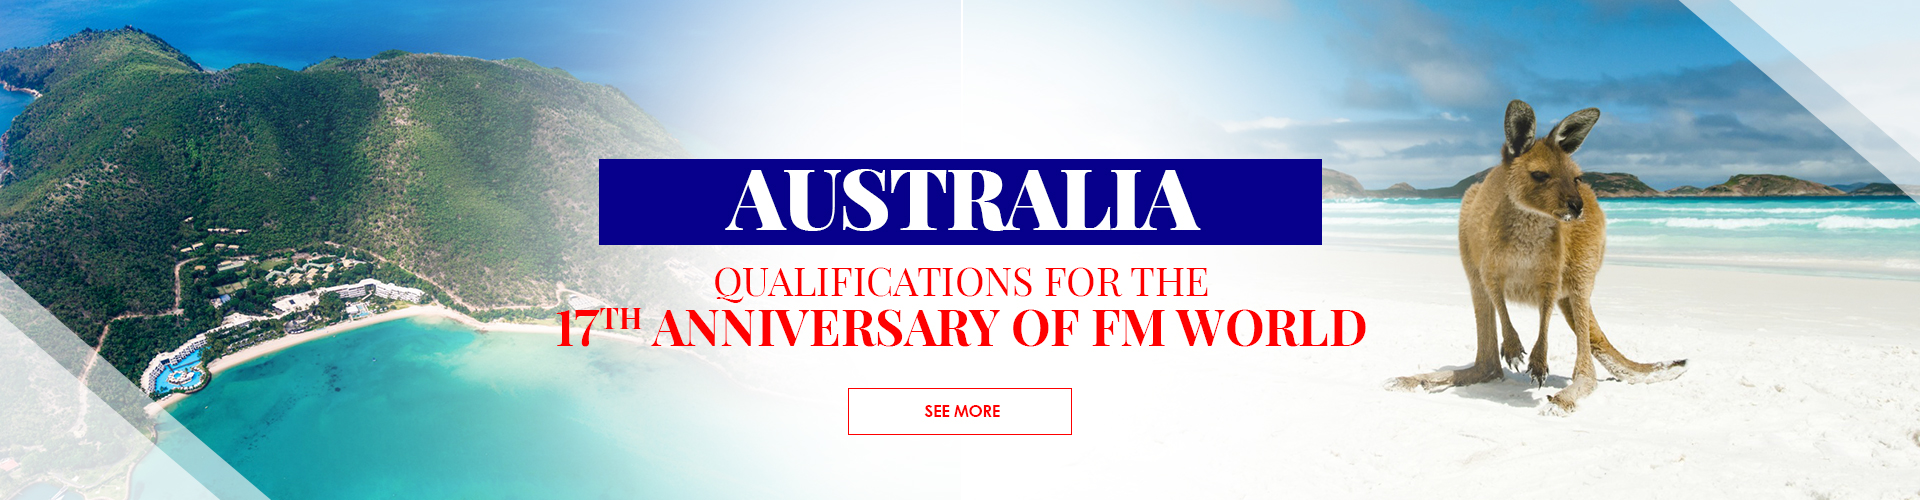 QUALIFICATIONS FOR THE 17TH ANNIVERSARY OF FM WORLD